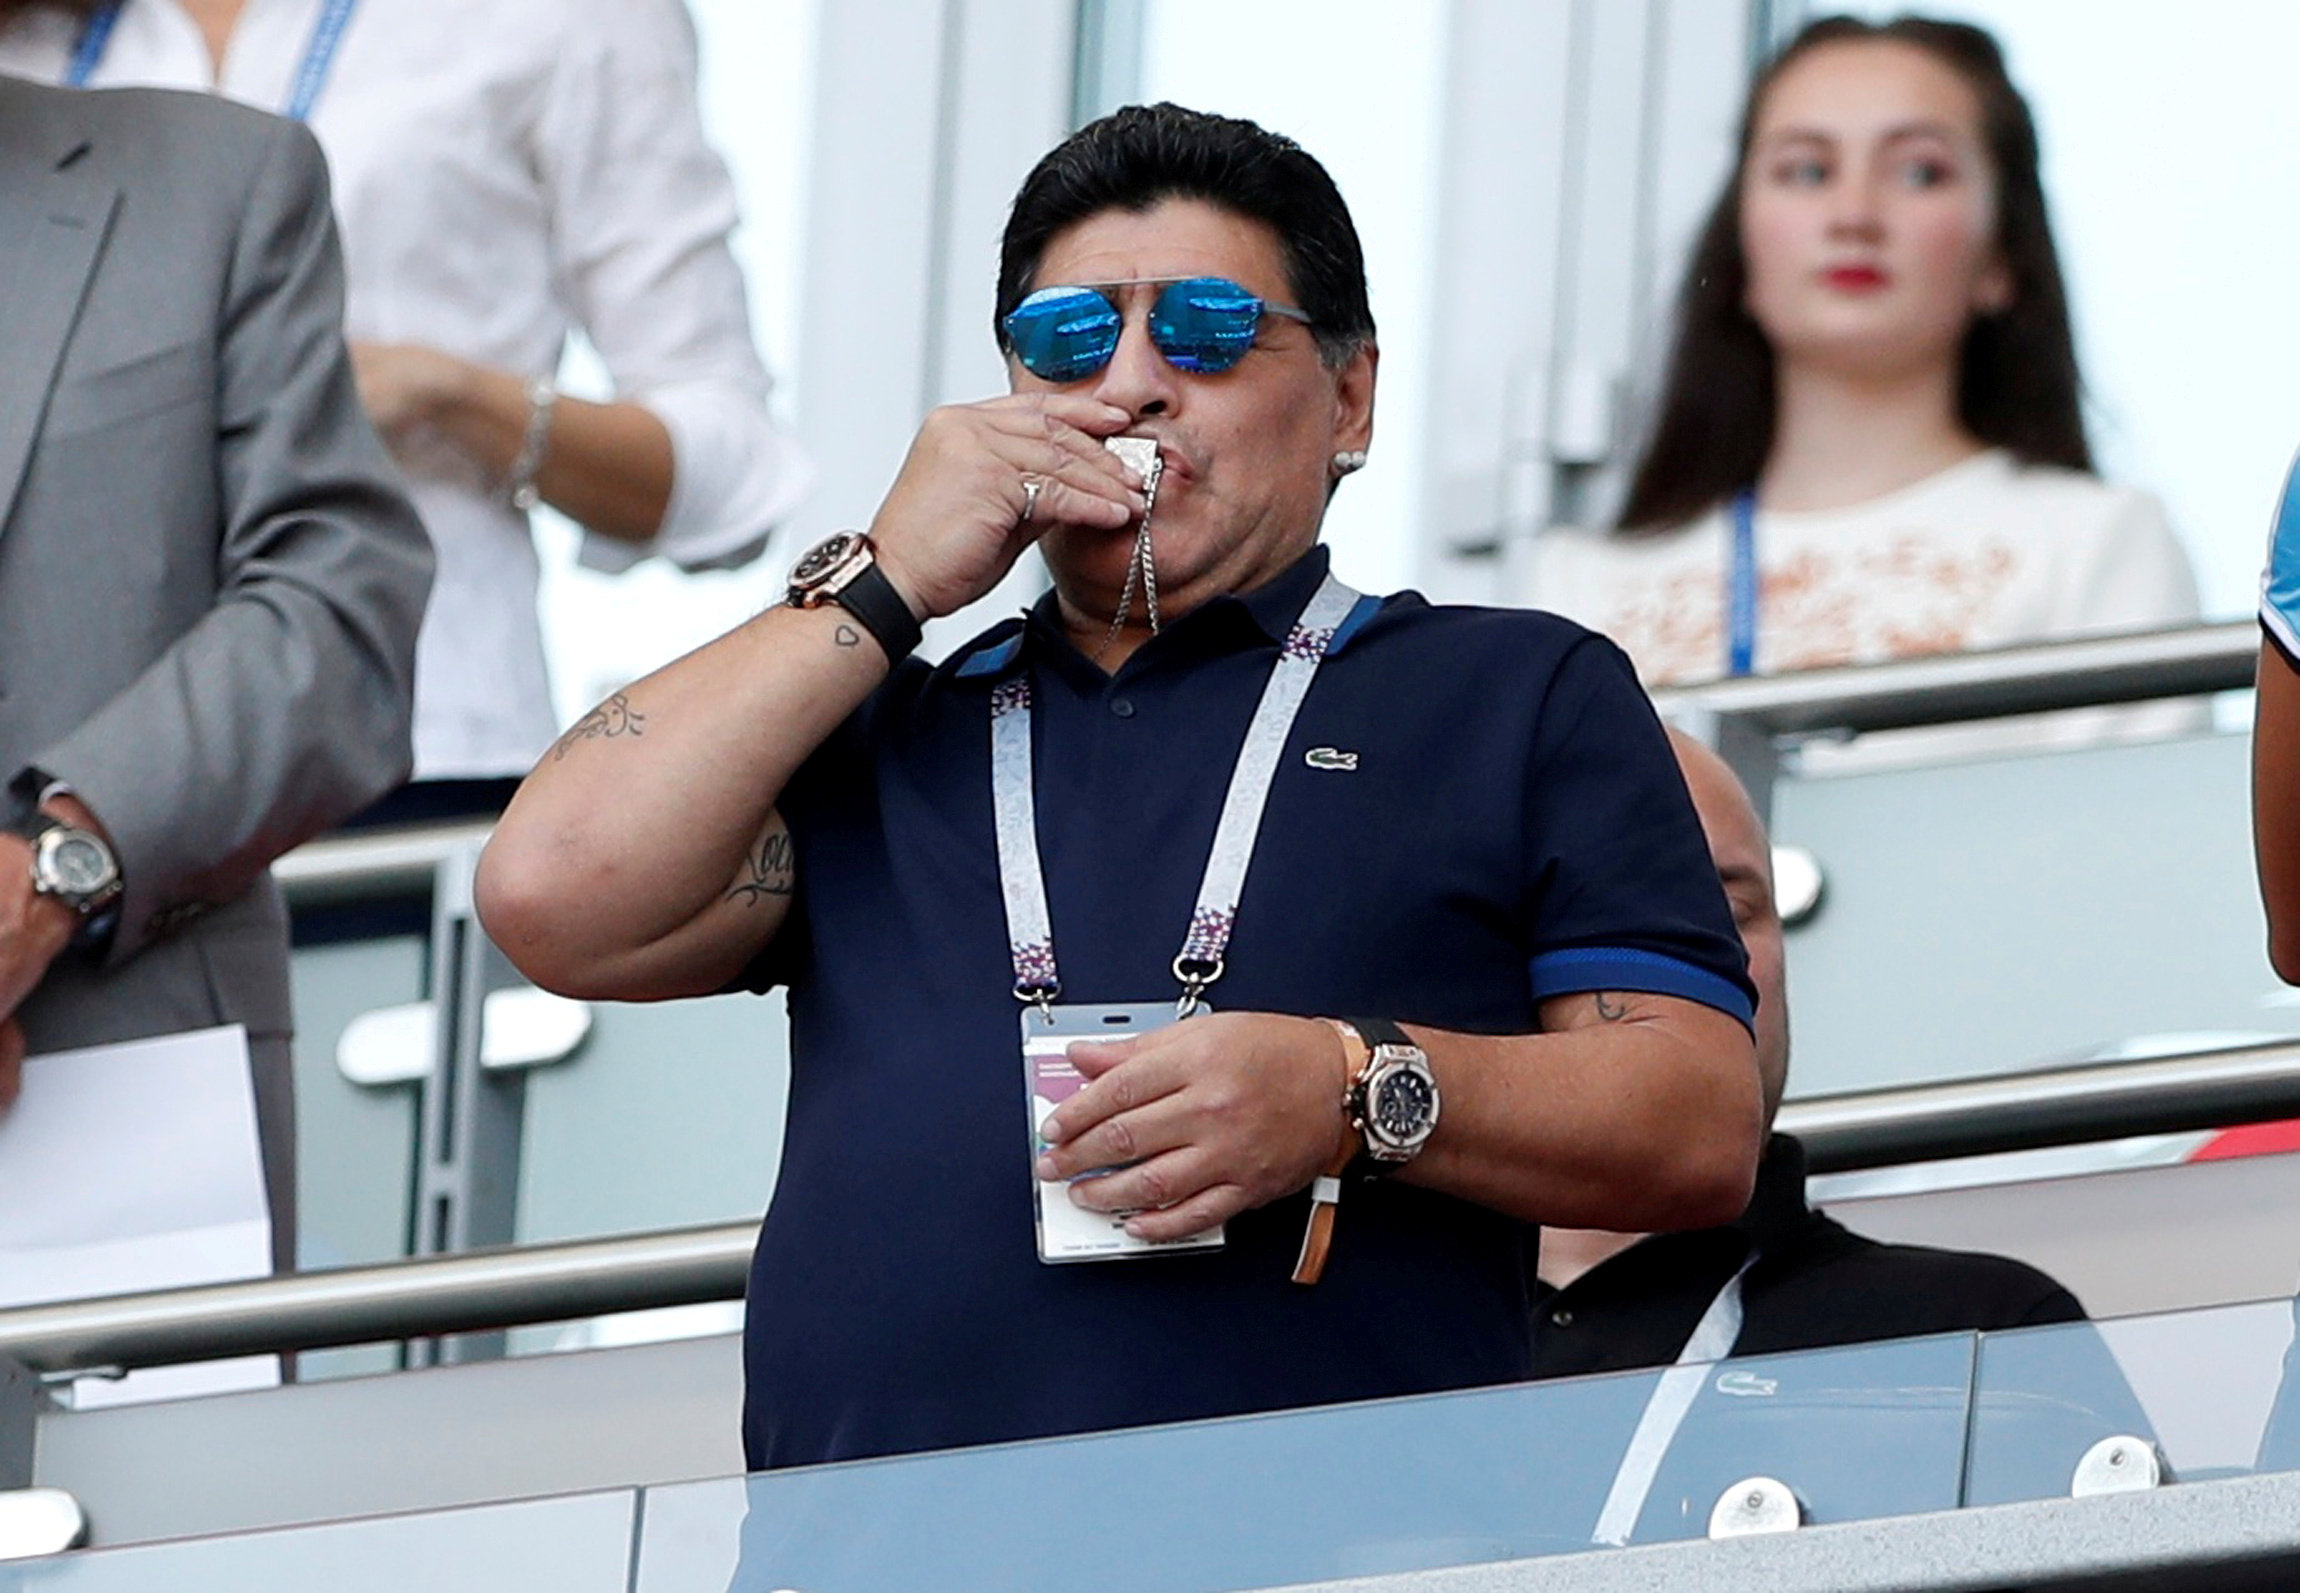 Football: Maradona lashes out at Messi in greatest player debate